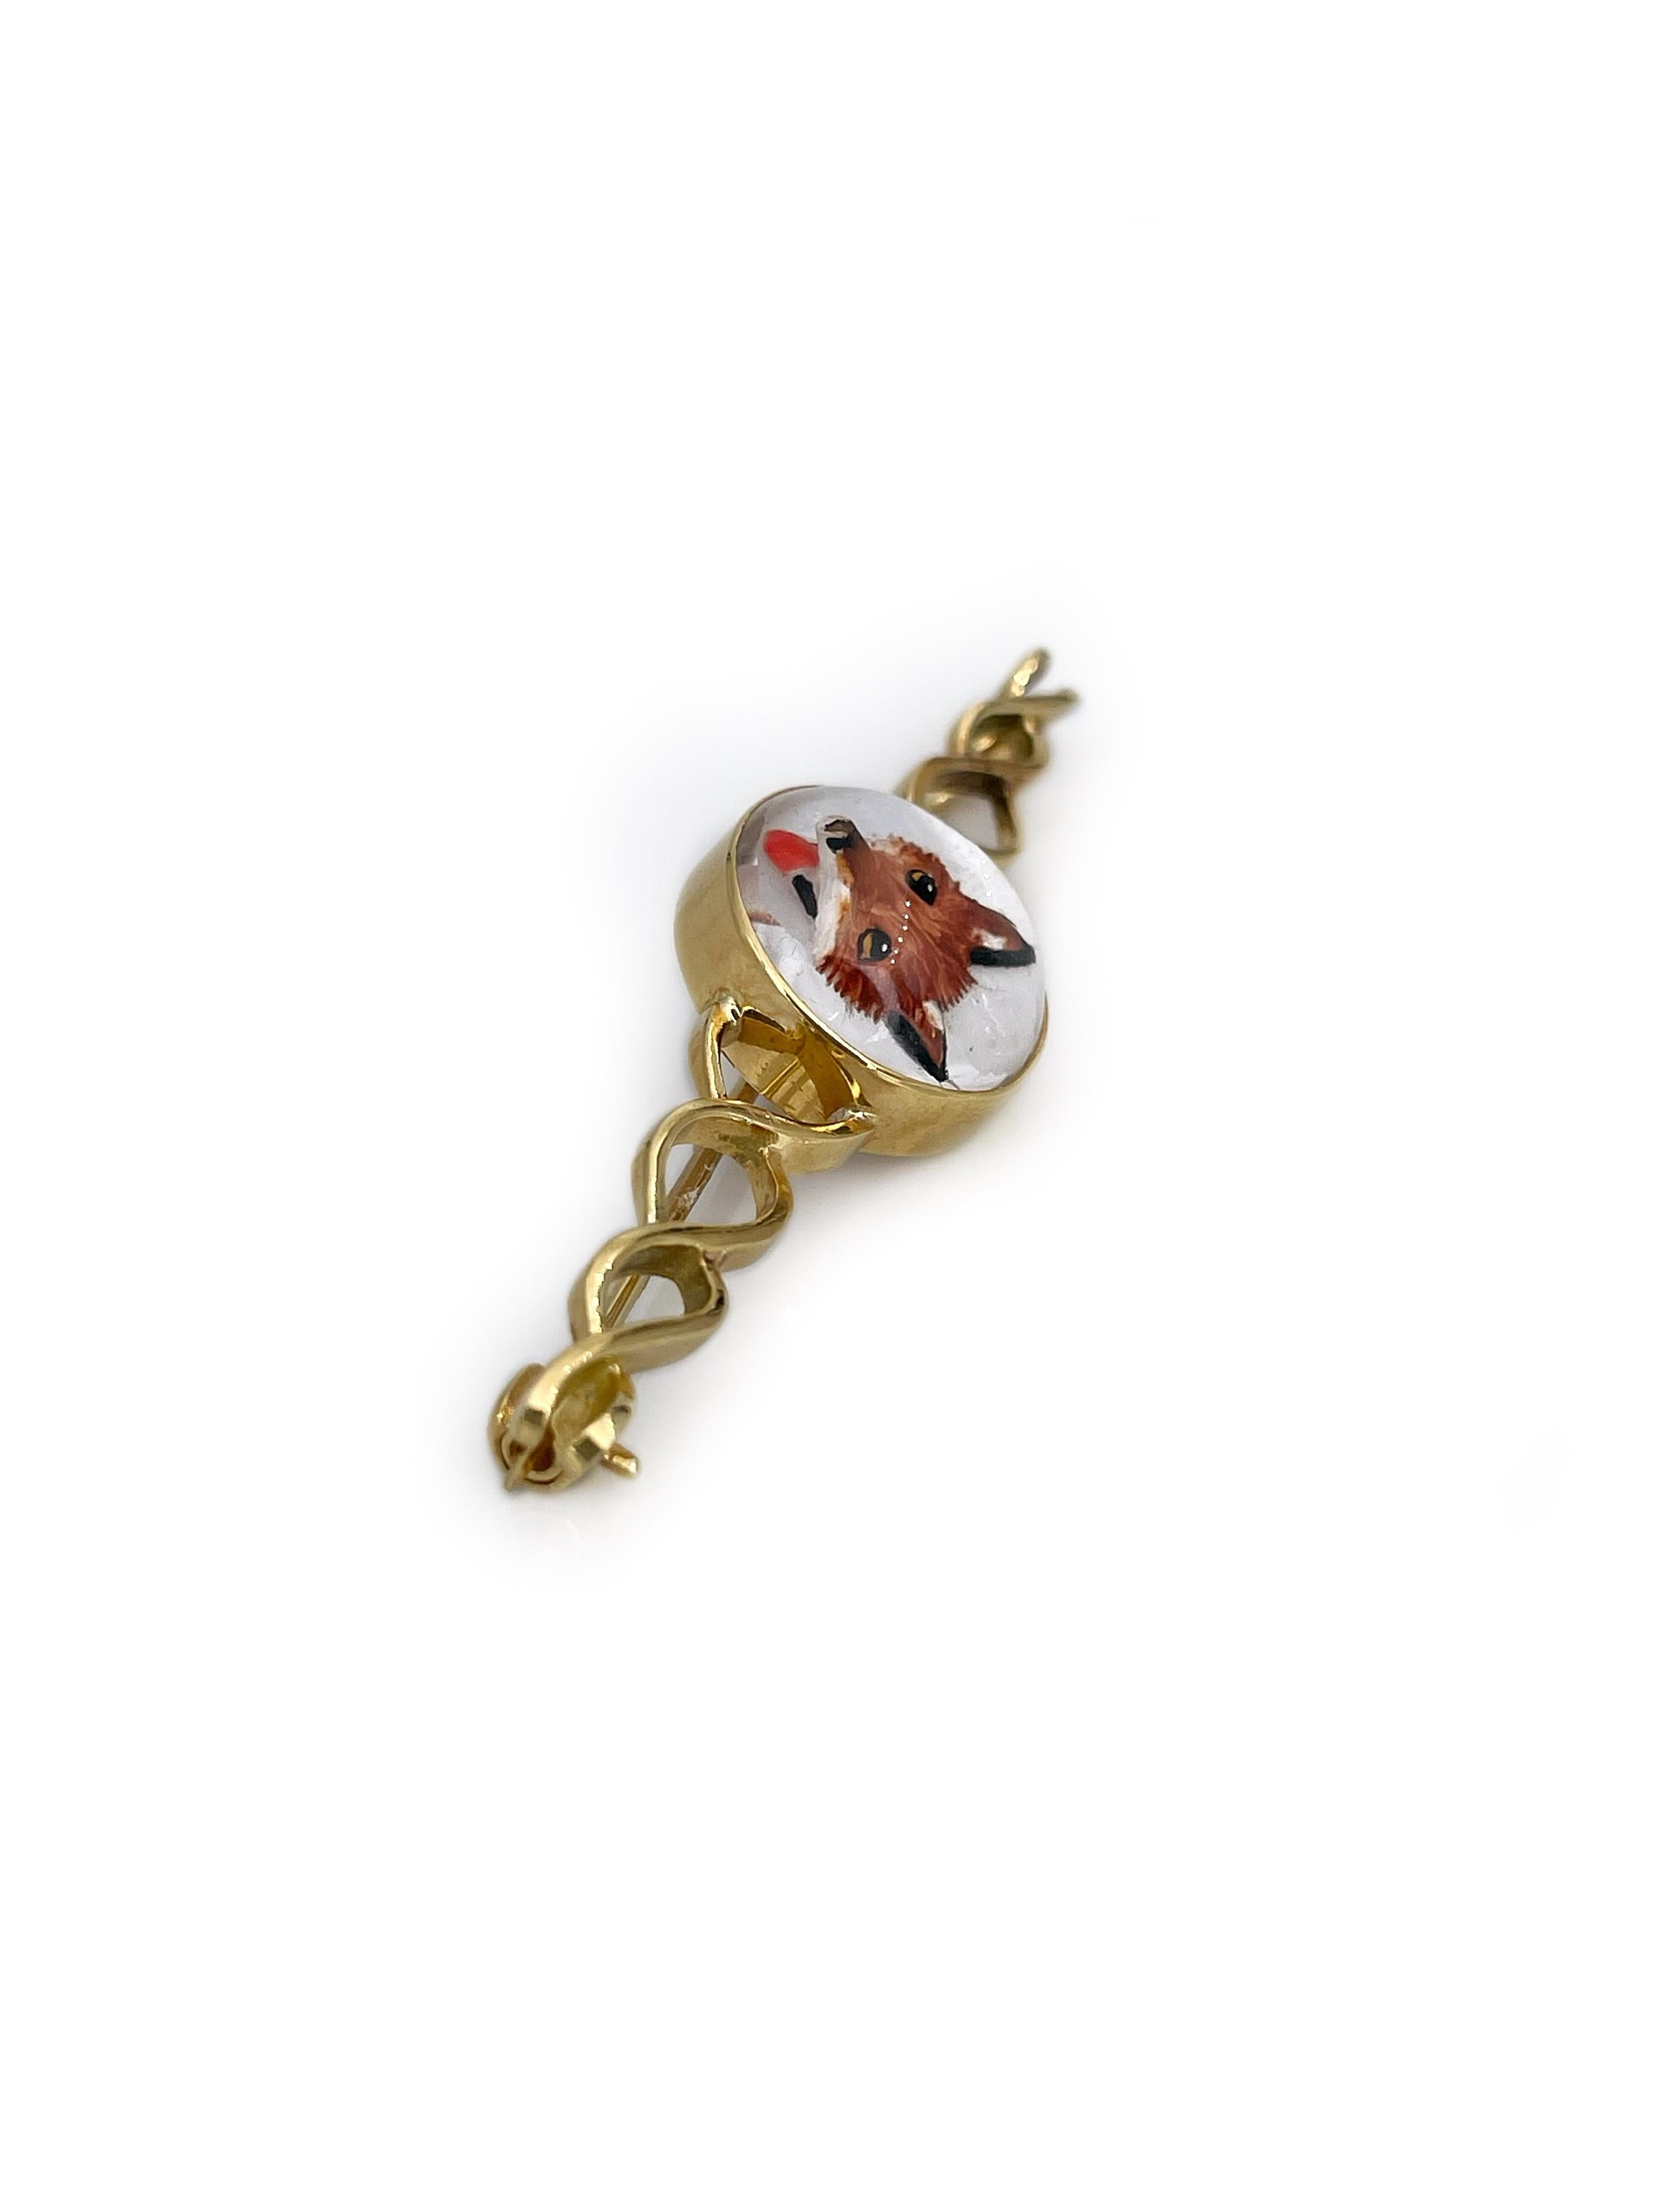 This is a Victorian bar brooch crafted in 18K yellow gold depicting a cute fox. The circular detail is made of cabochon cut rock crystal, which back is covered with nacre. The picture of a fox is hand drawn and is remarkably lifelike. 

The piece is